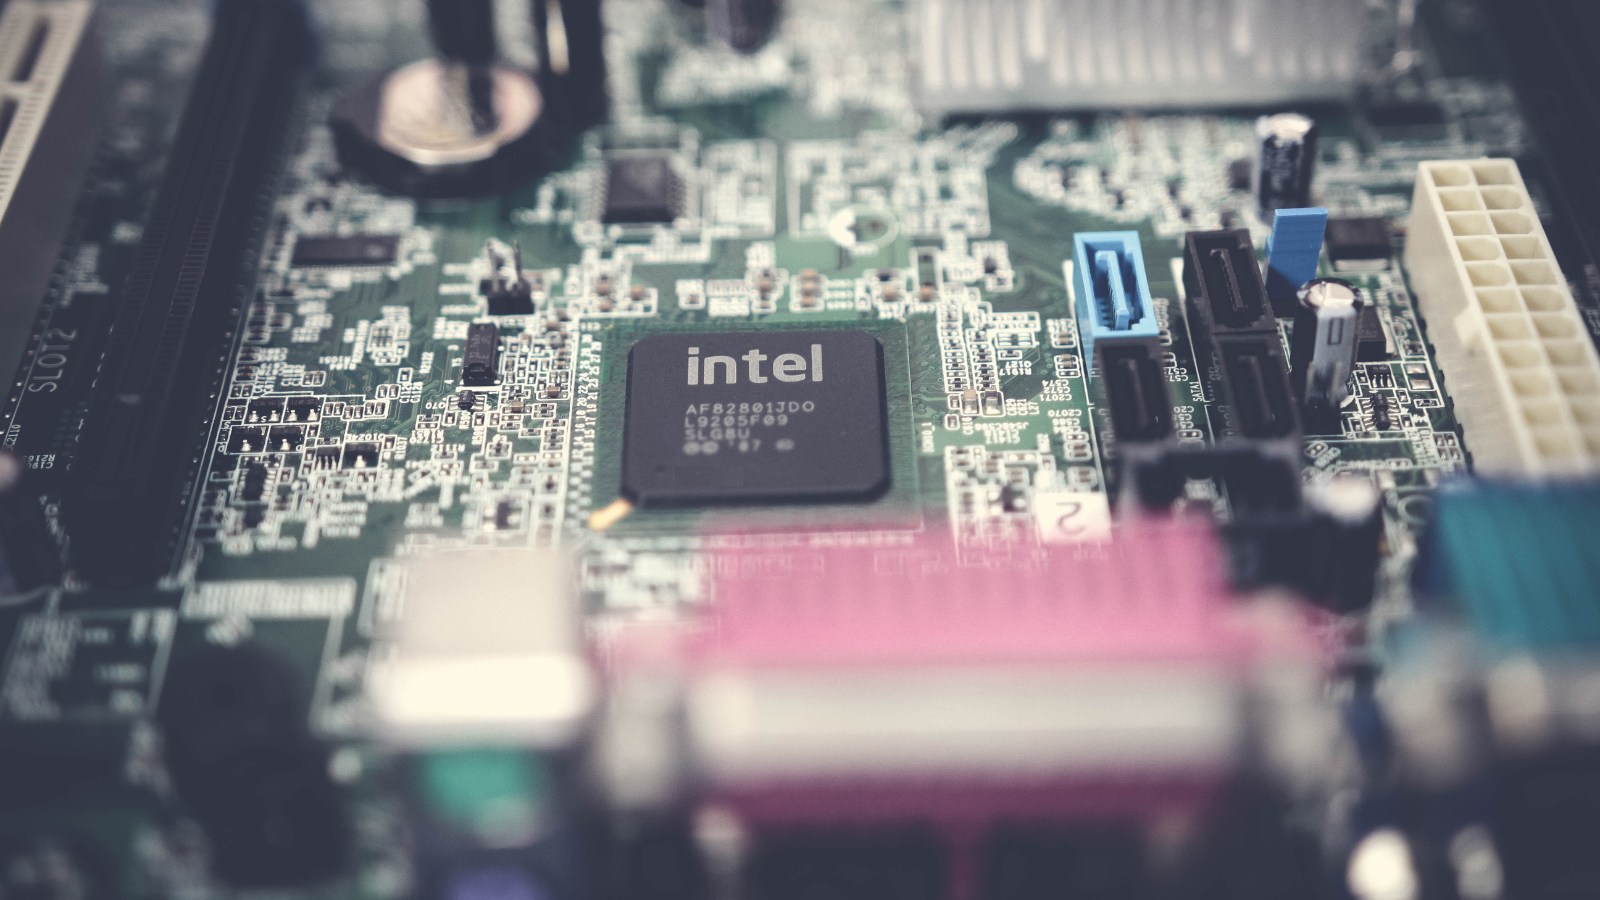 An Intel chip is seen in a circuit board